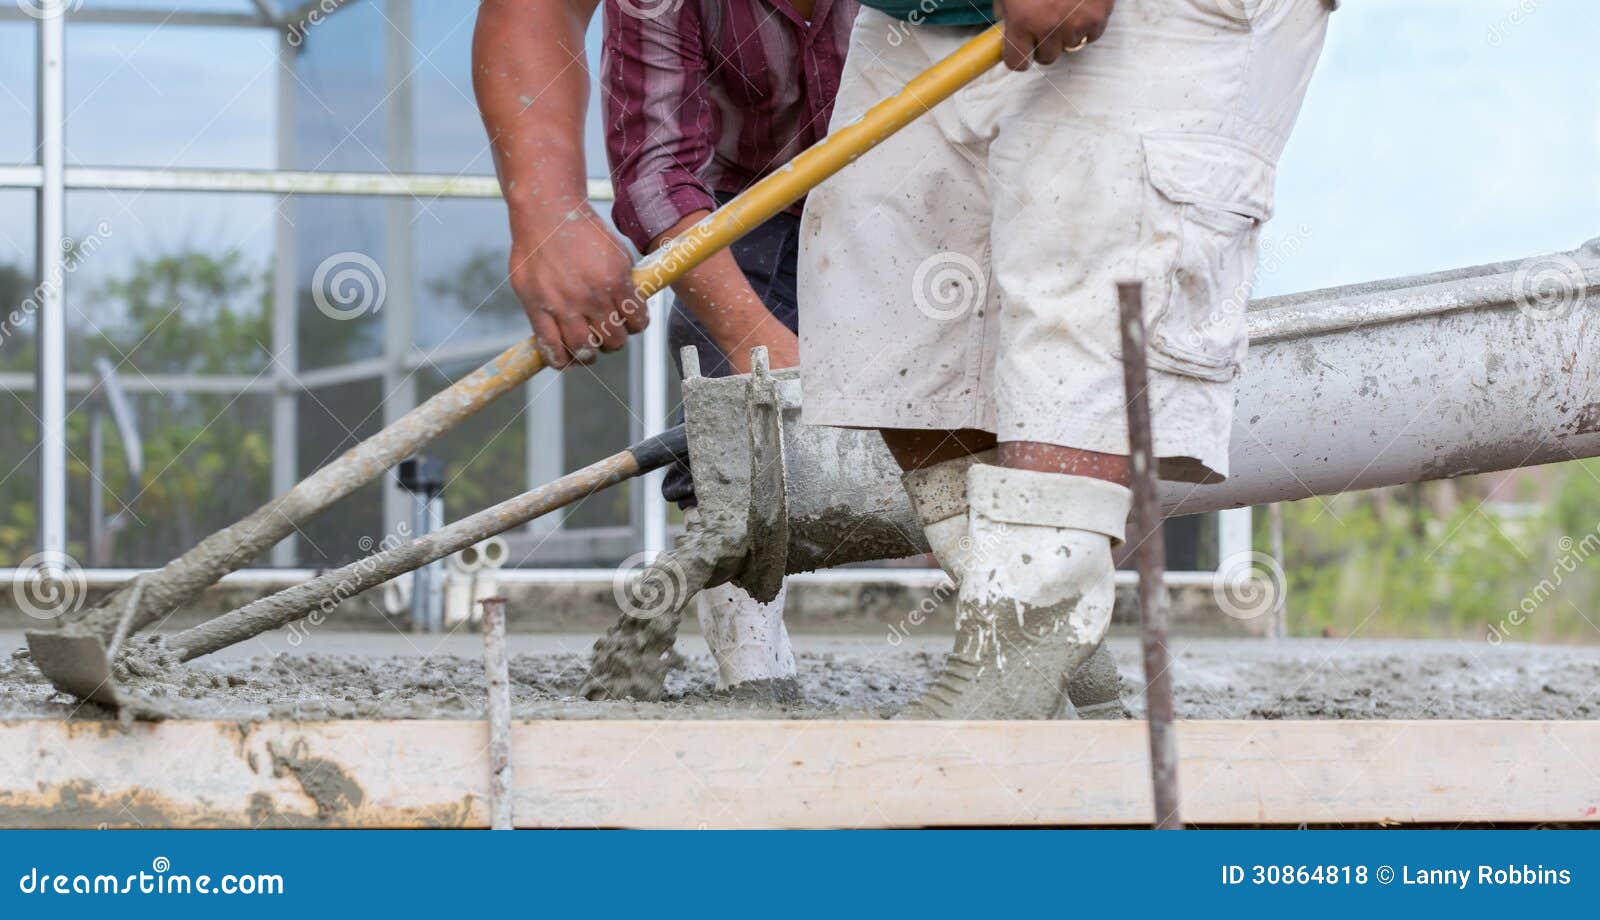 Cement Work Royalty Free Stock Photos - Image: 30864818